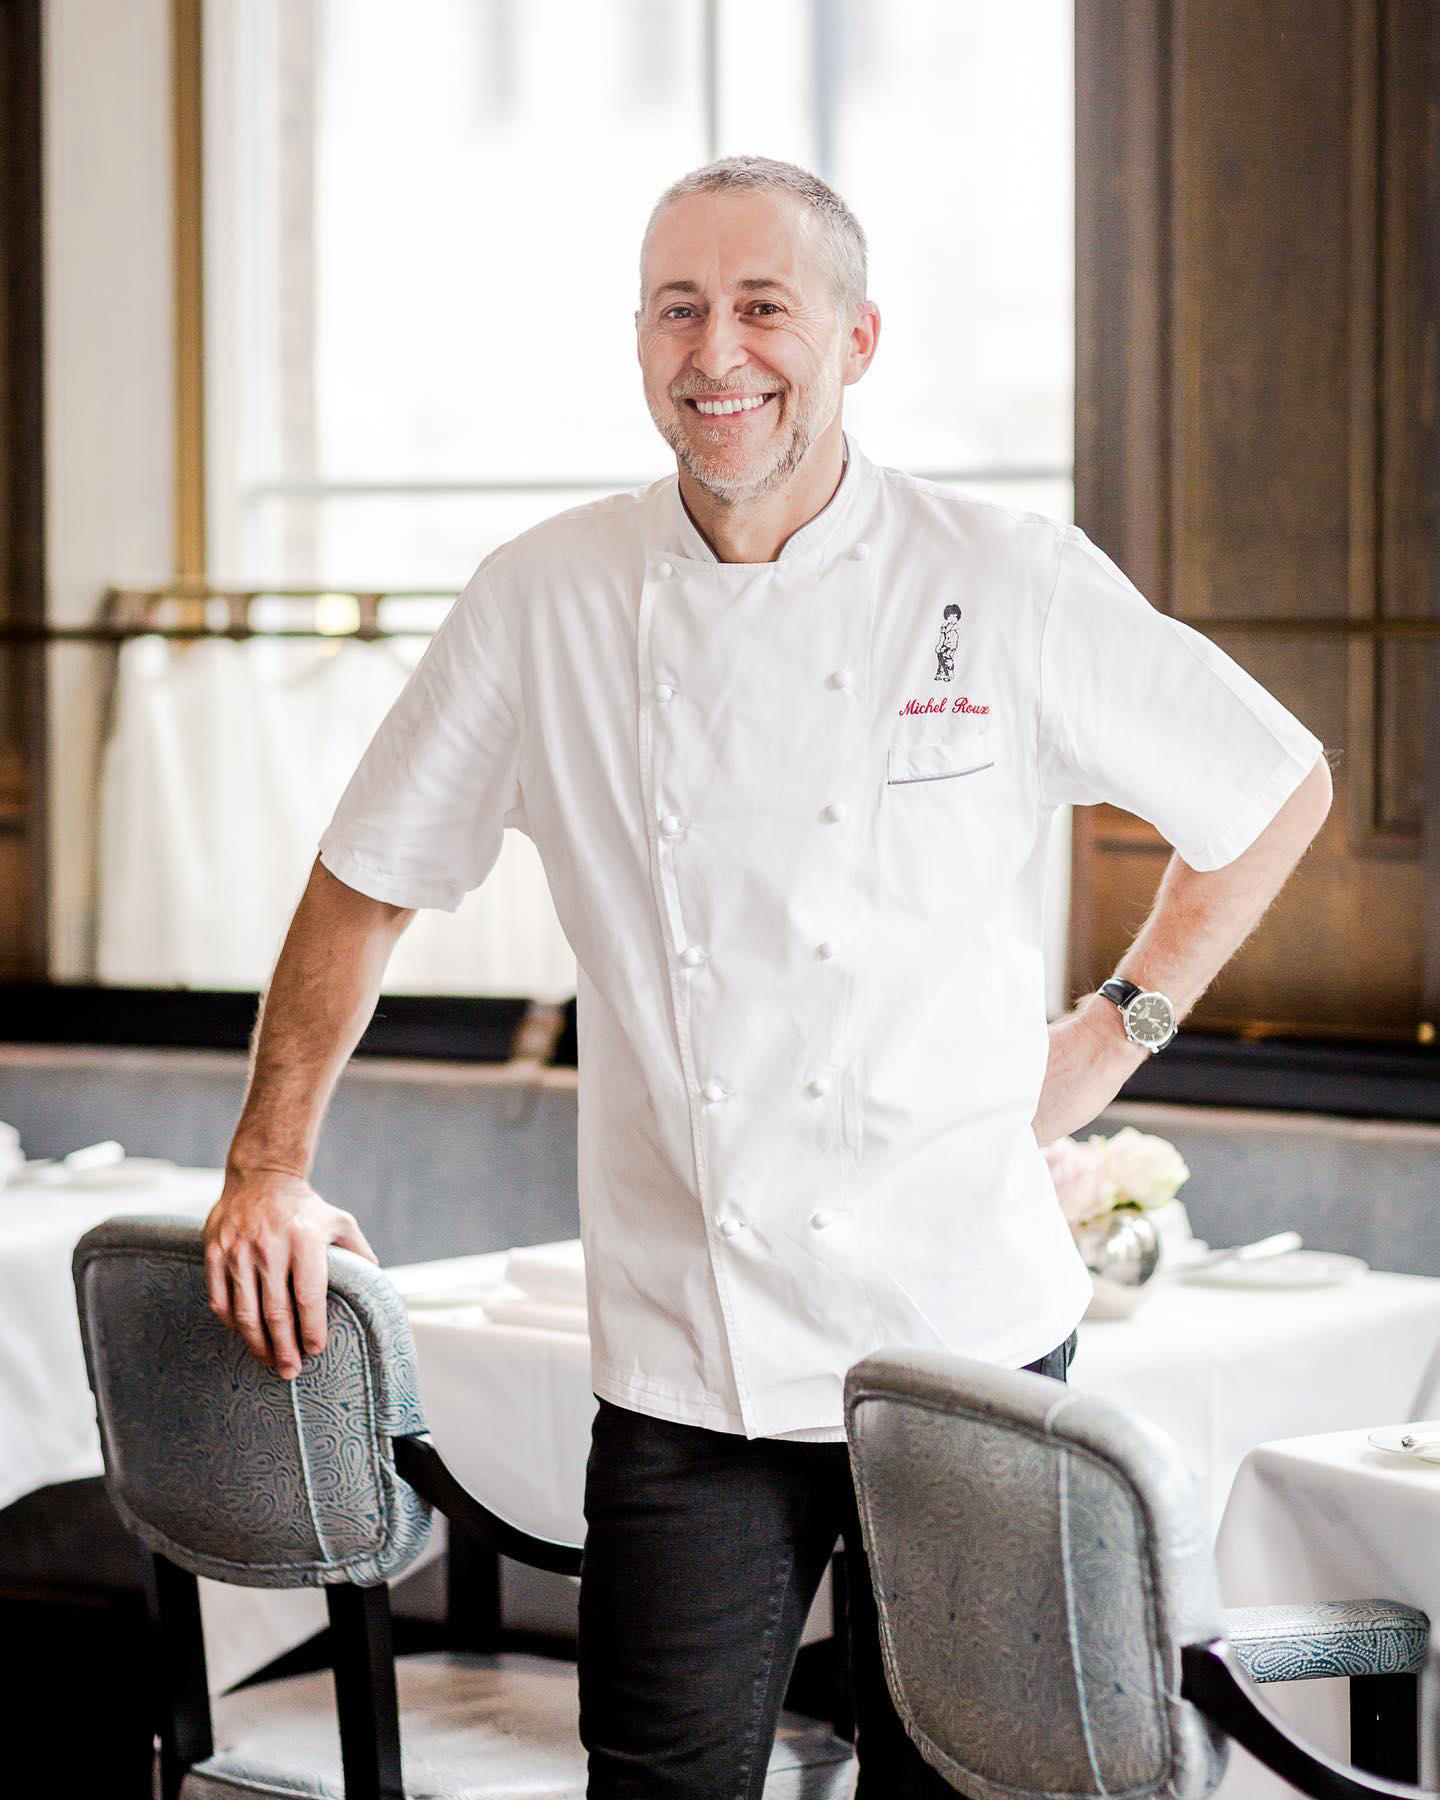 Roux at The Landau - The team at The Langham, London want to wish Michel Roux Jr